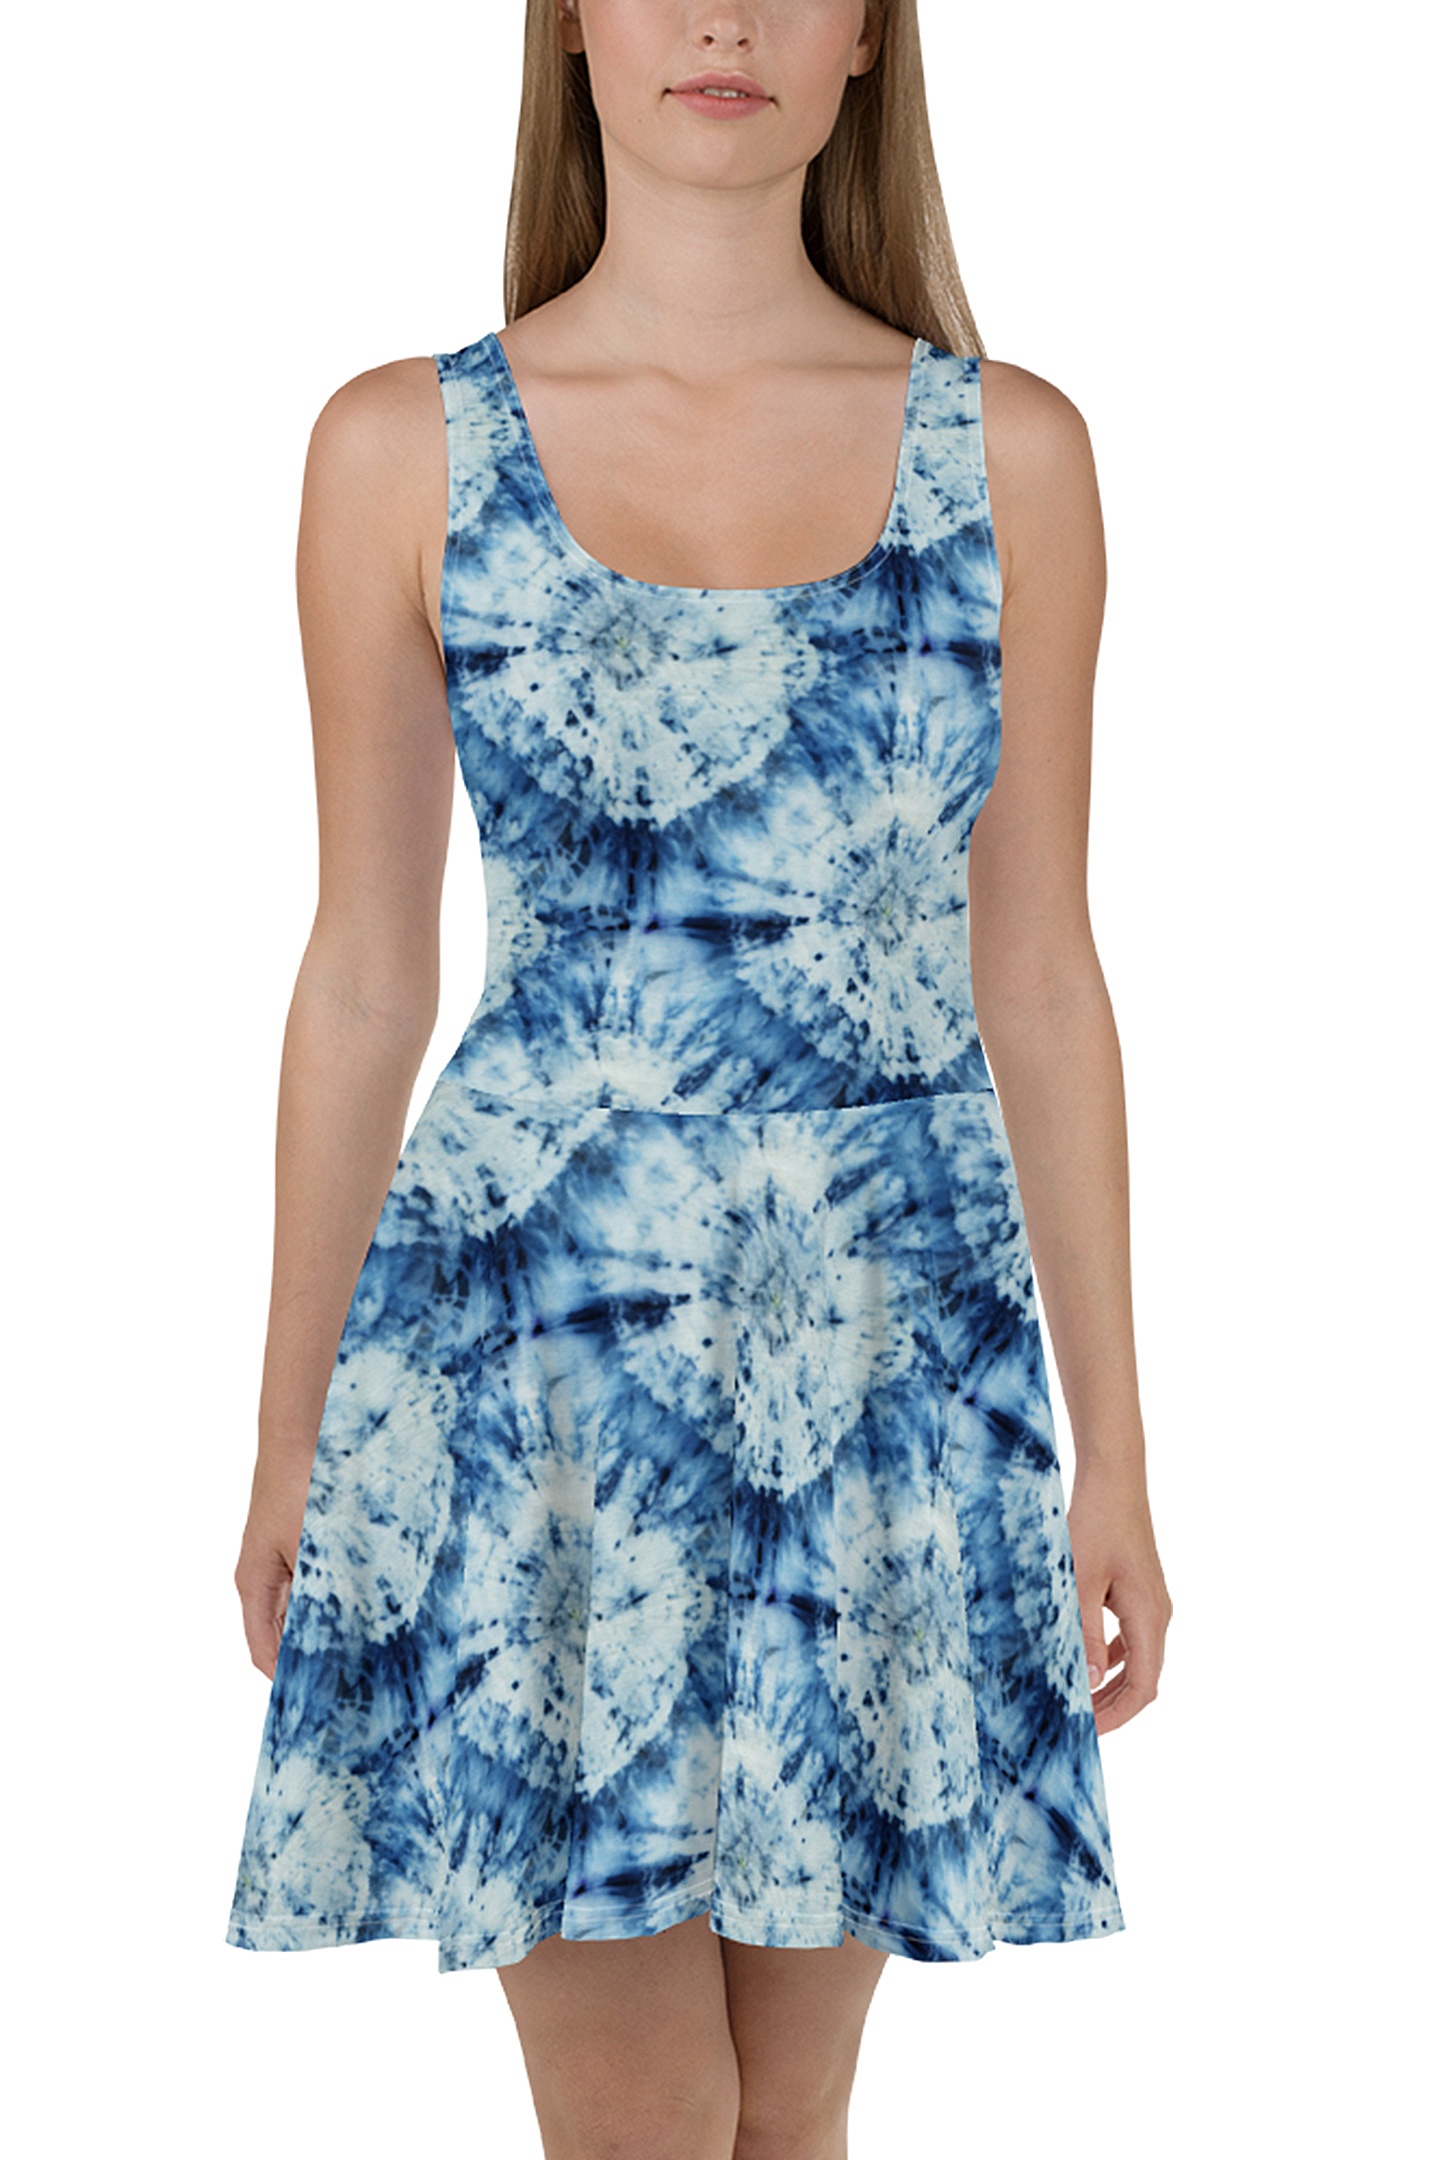 Blue Tie Dye Sundress - Designed By Squeaky Chimp T-shirts & Leggings